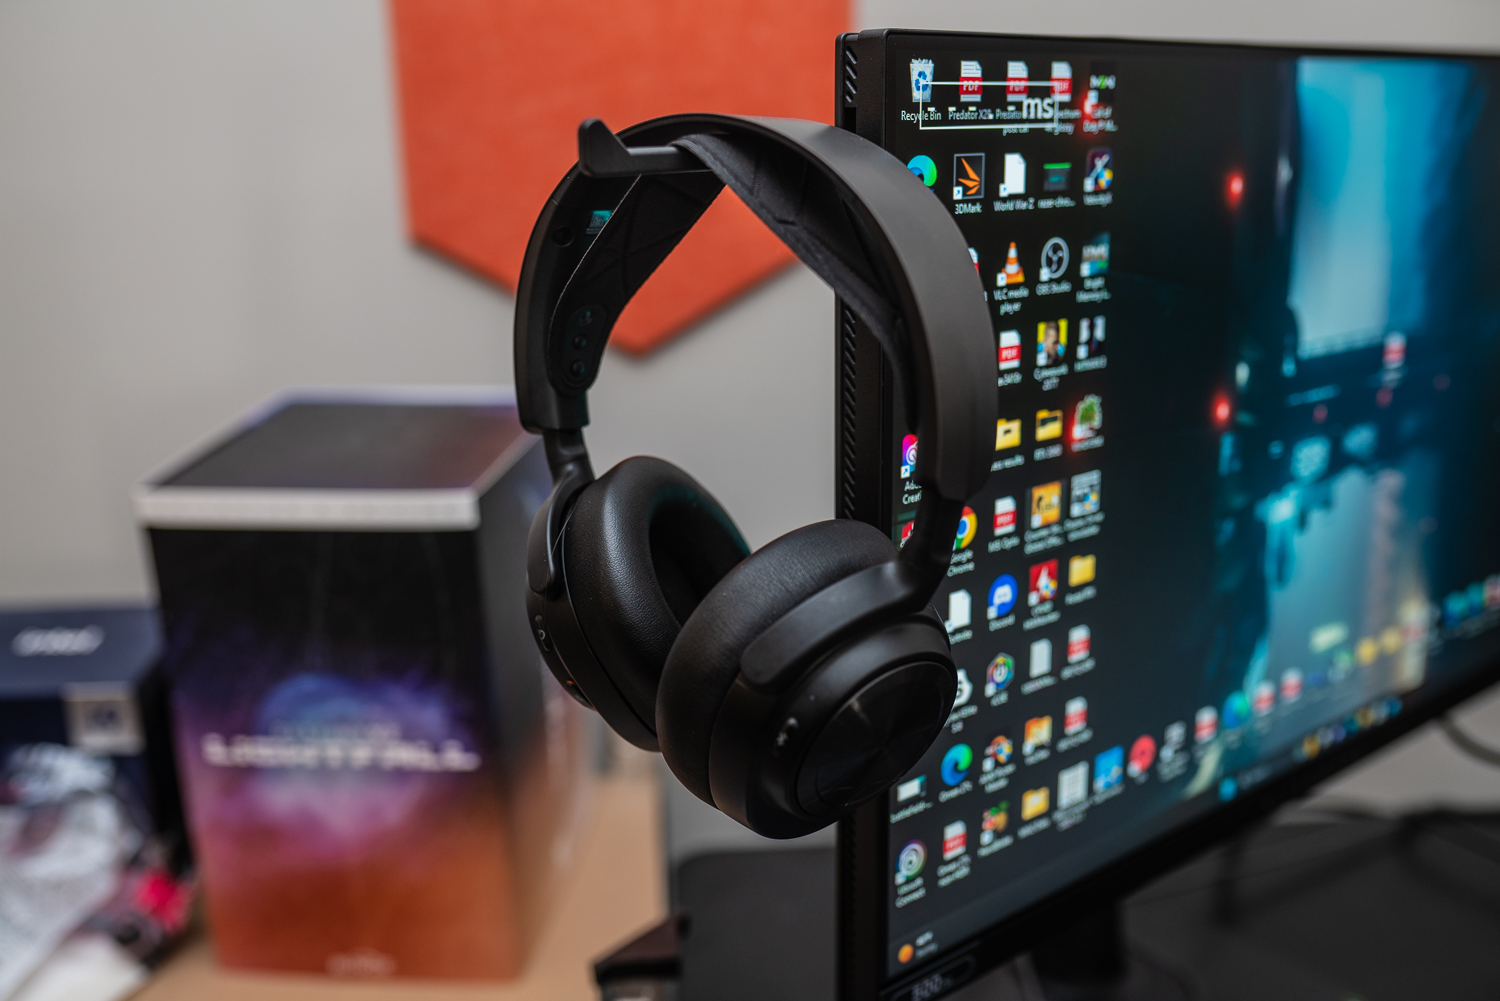 Alienware 500Hz gaming monitor review: one for the pros